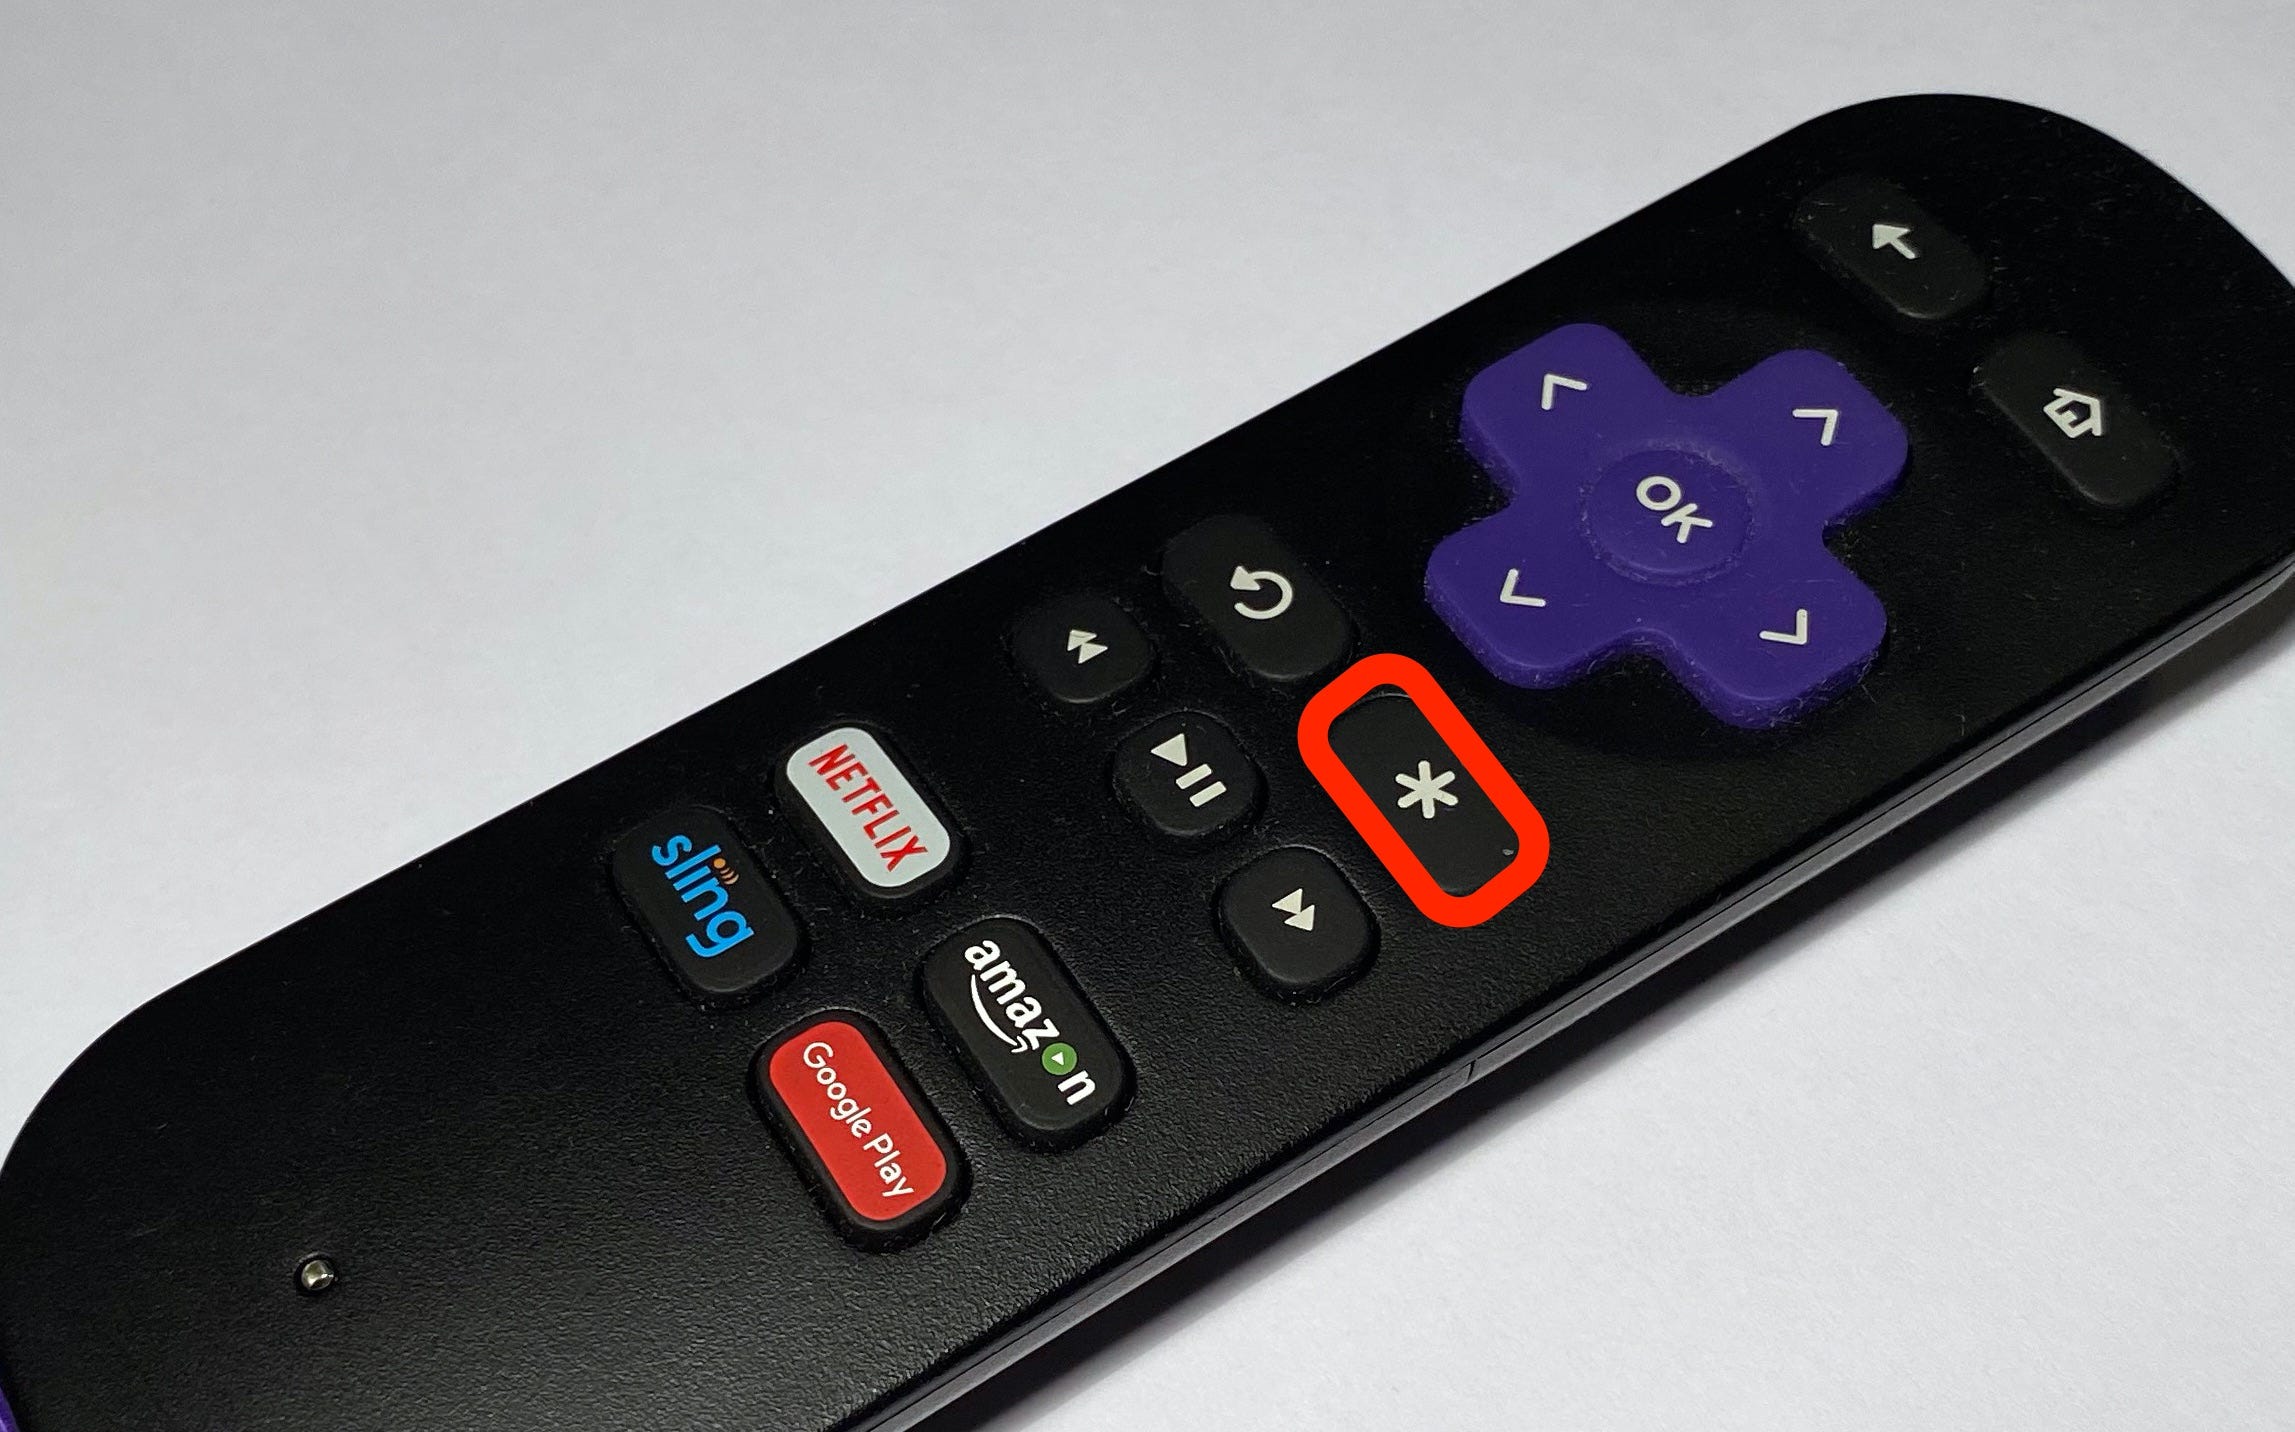 Image of Roku remote with asterisk button highlighted